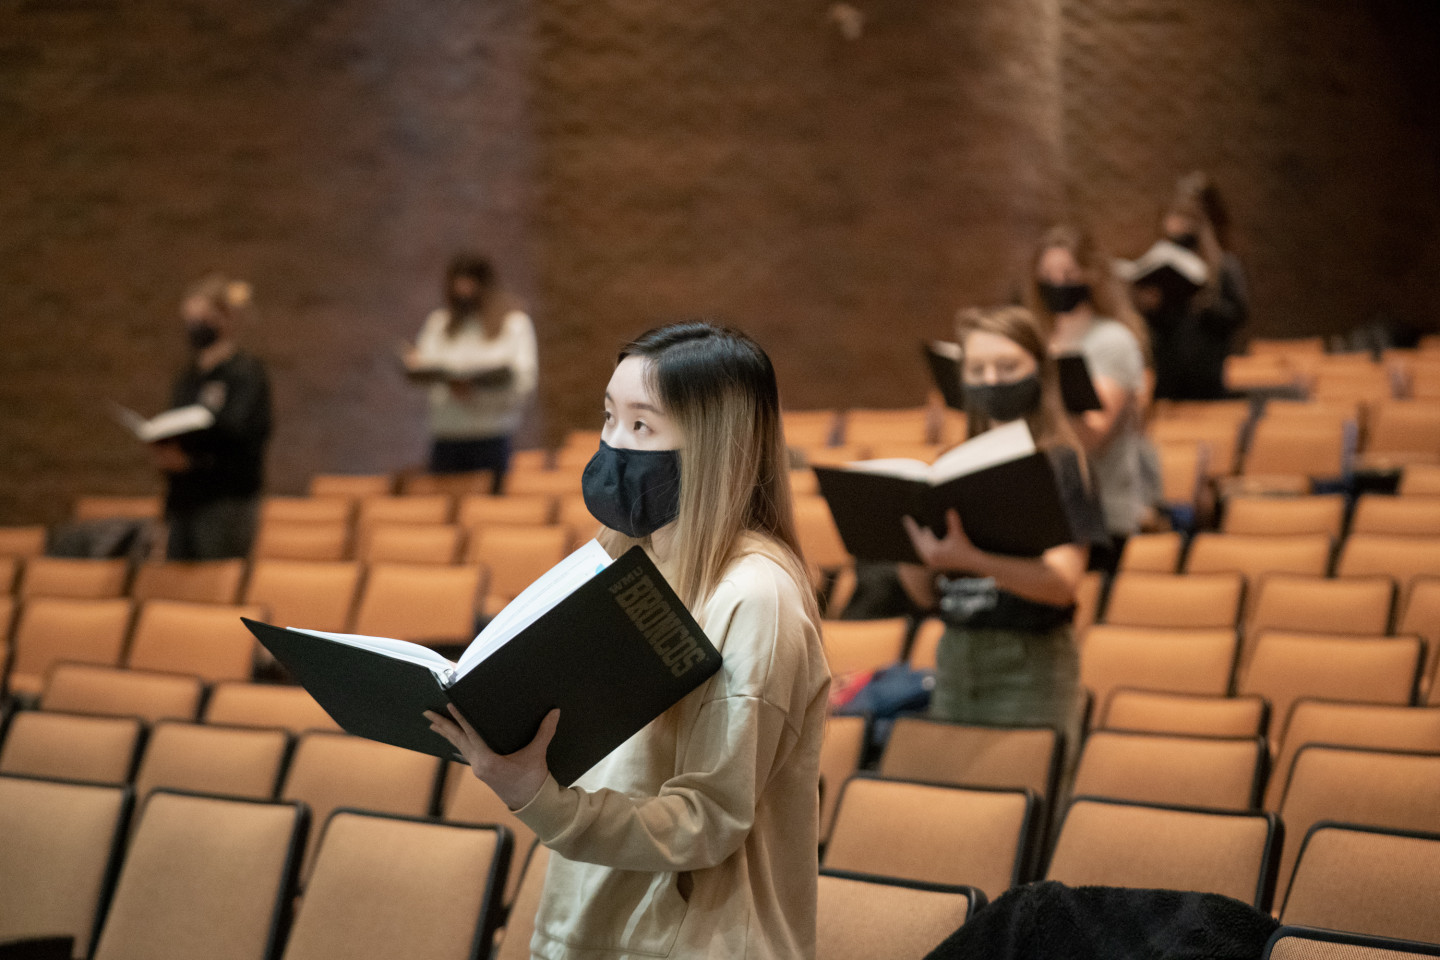 Students wearing masks sing while holding sheet music in a lecture hall.